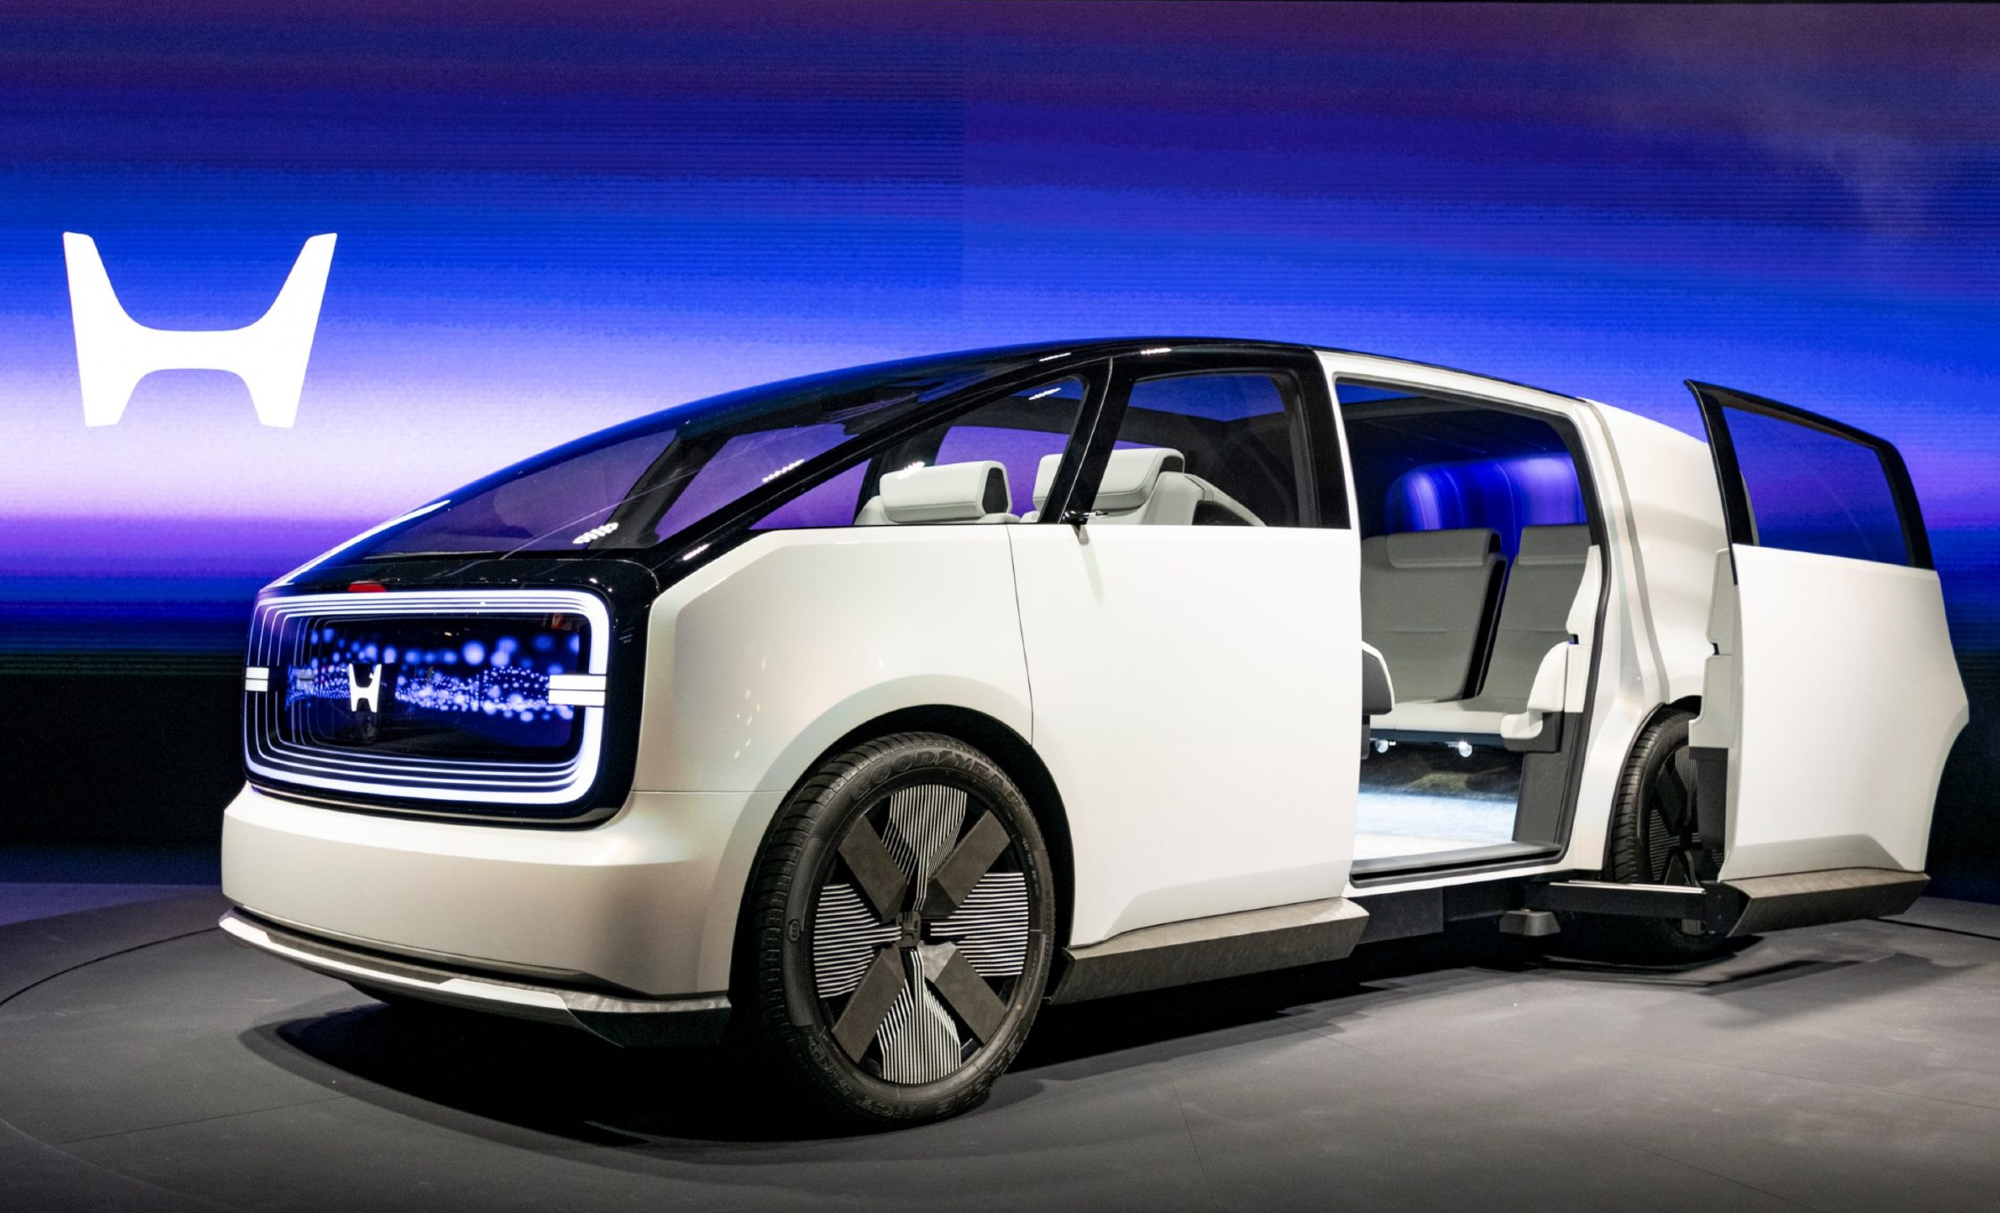 Honda 0 Space-Hub concept EV left front three-quarter view with cabin row door extended from the side of the vehicle.